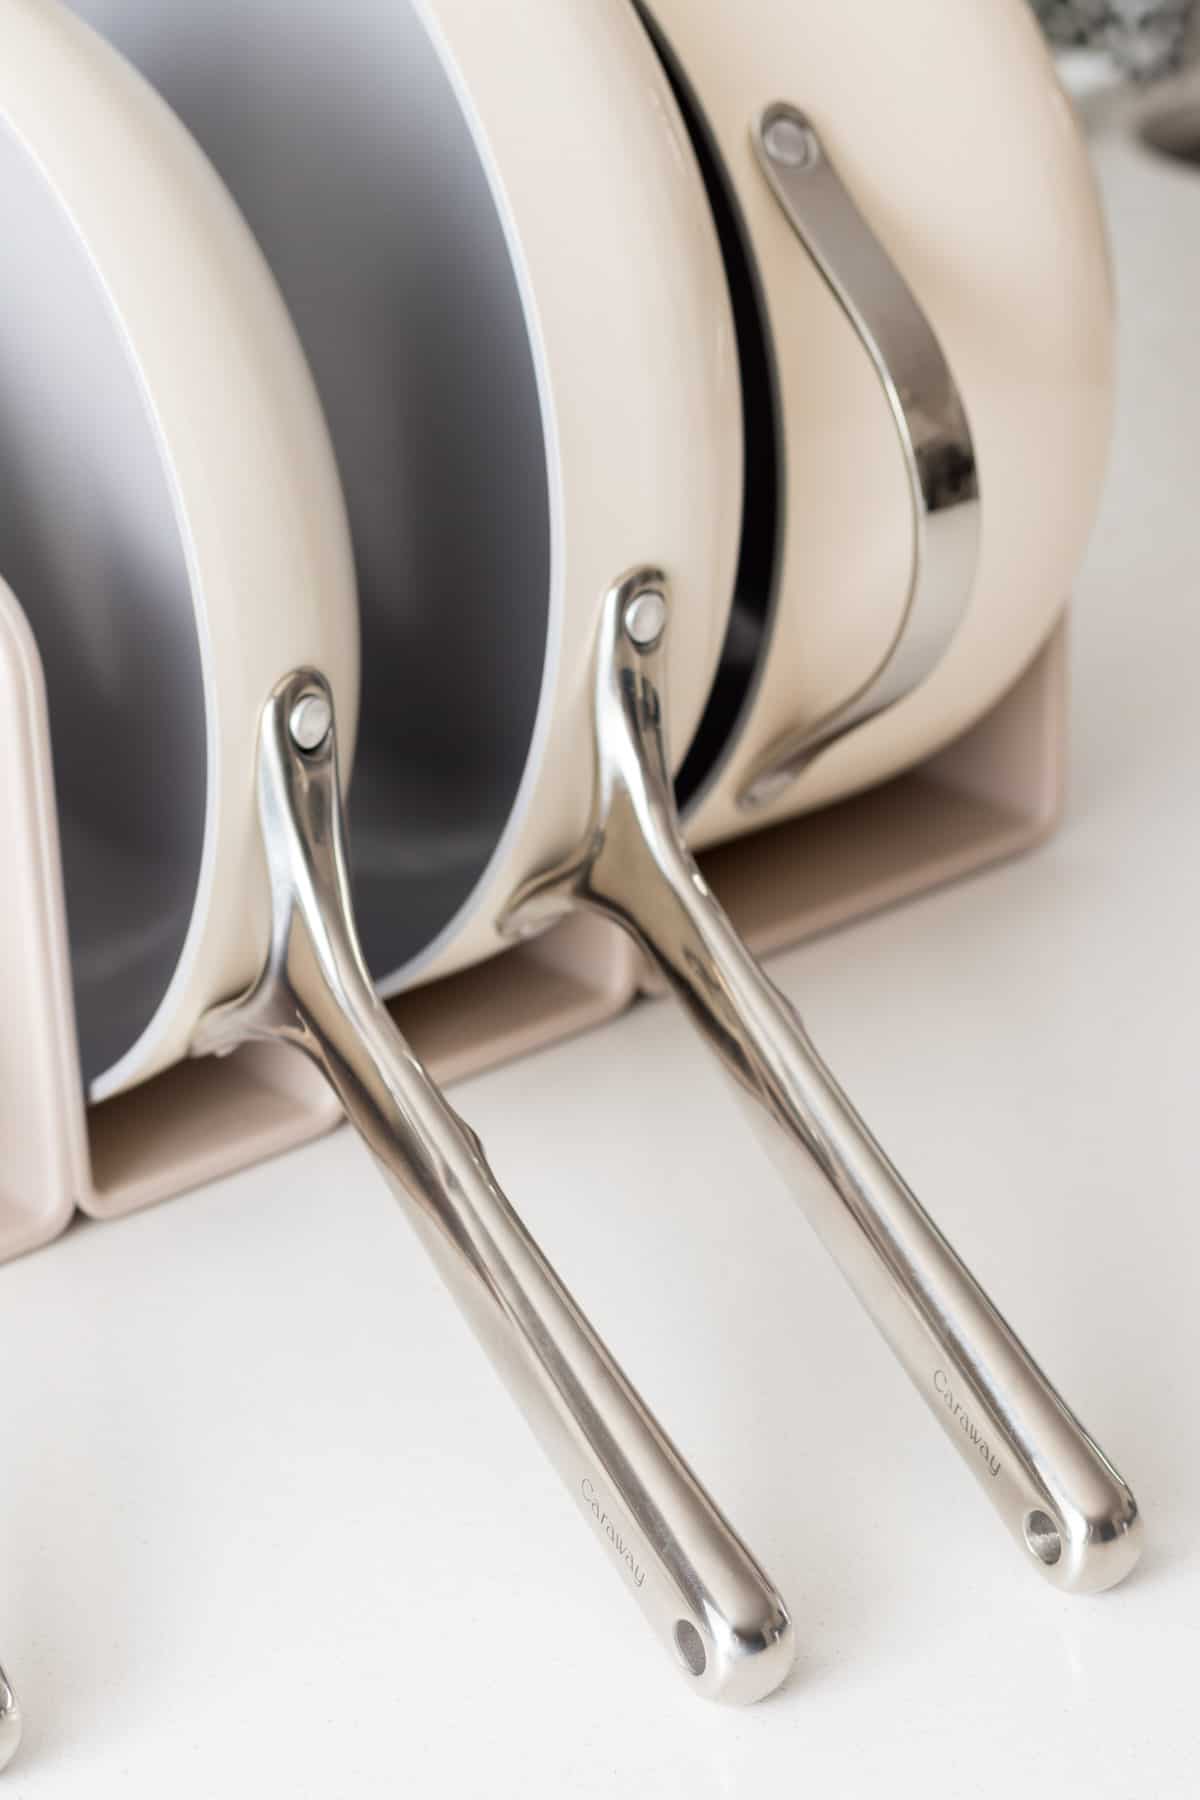 Closeup of cookware on counter.